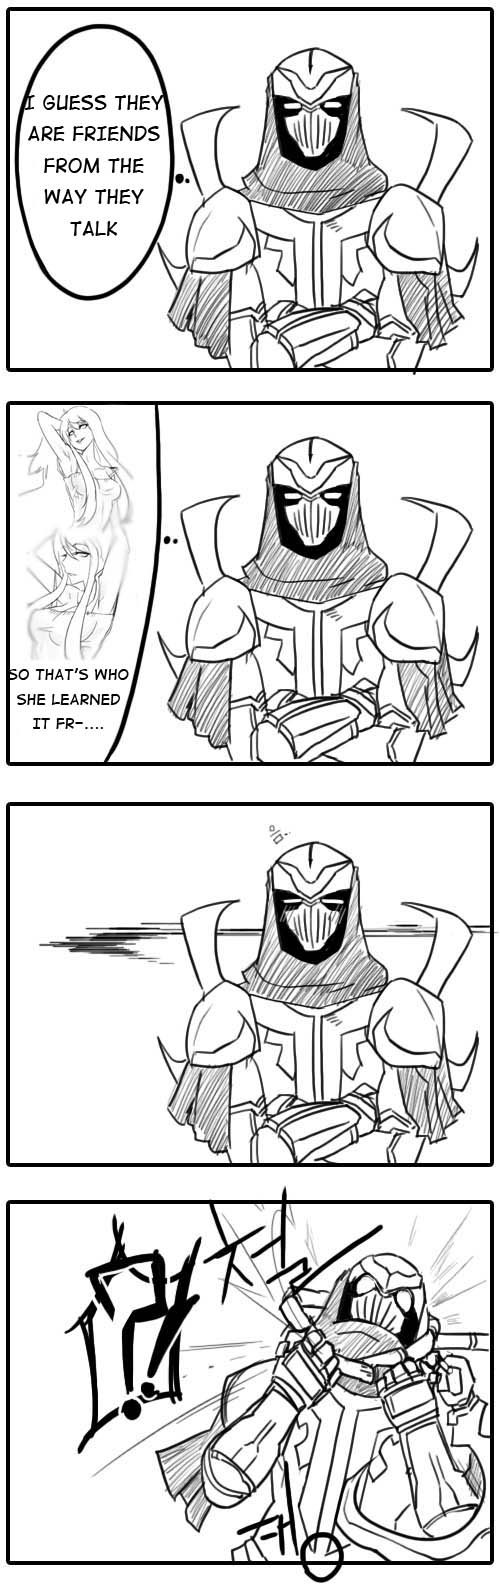 League of Legends Syndra & Zed's Everyday Life (Doujinshi) Vol. 1 Ch. 5